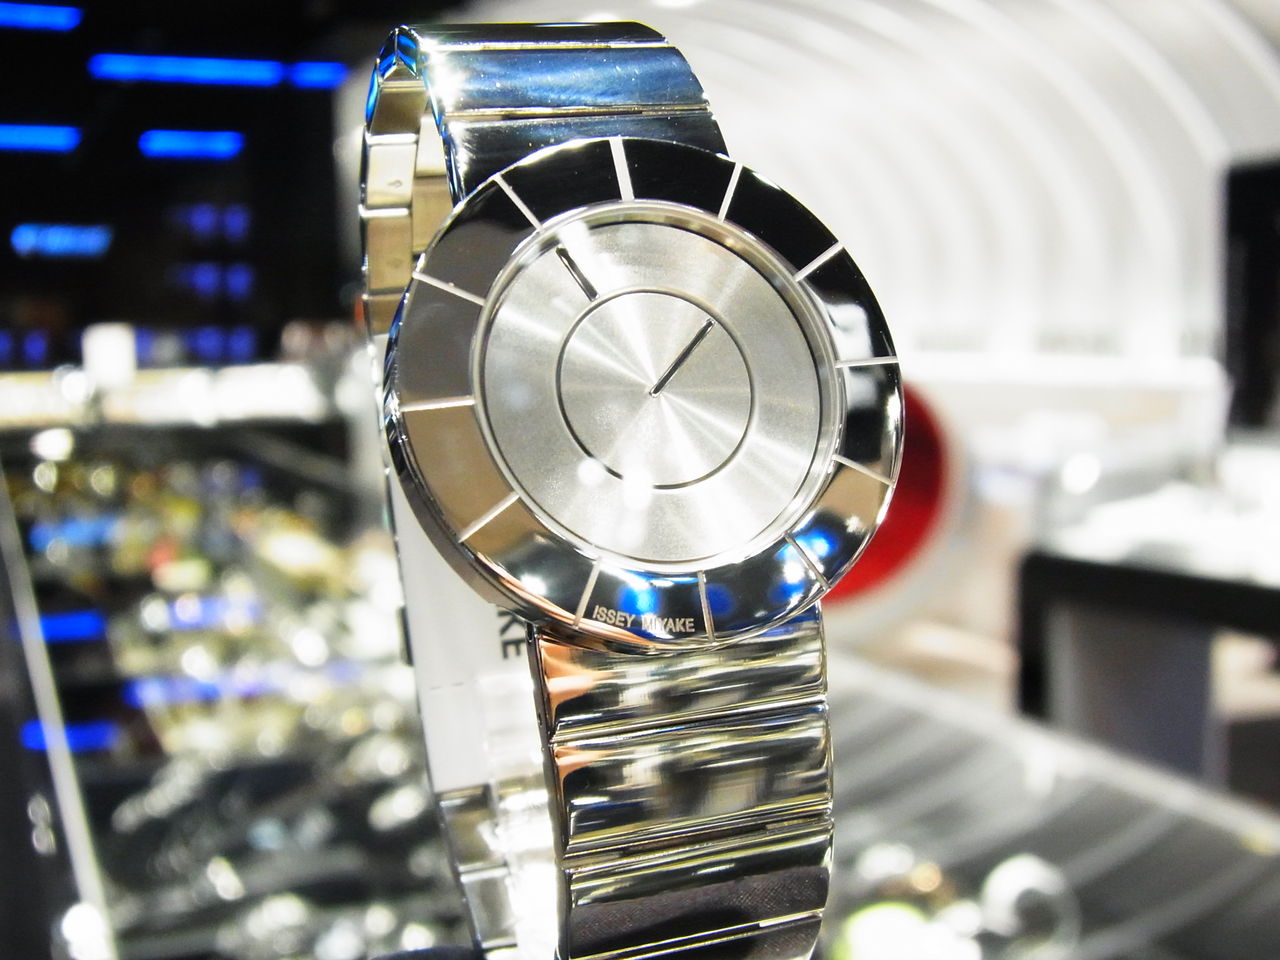 【ISSEY MIYAKE TO】 : THE WATCH SHOP. のブログ